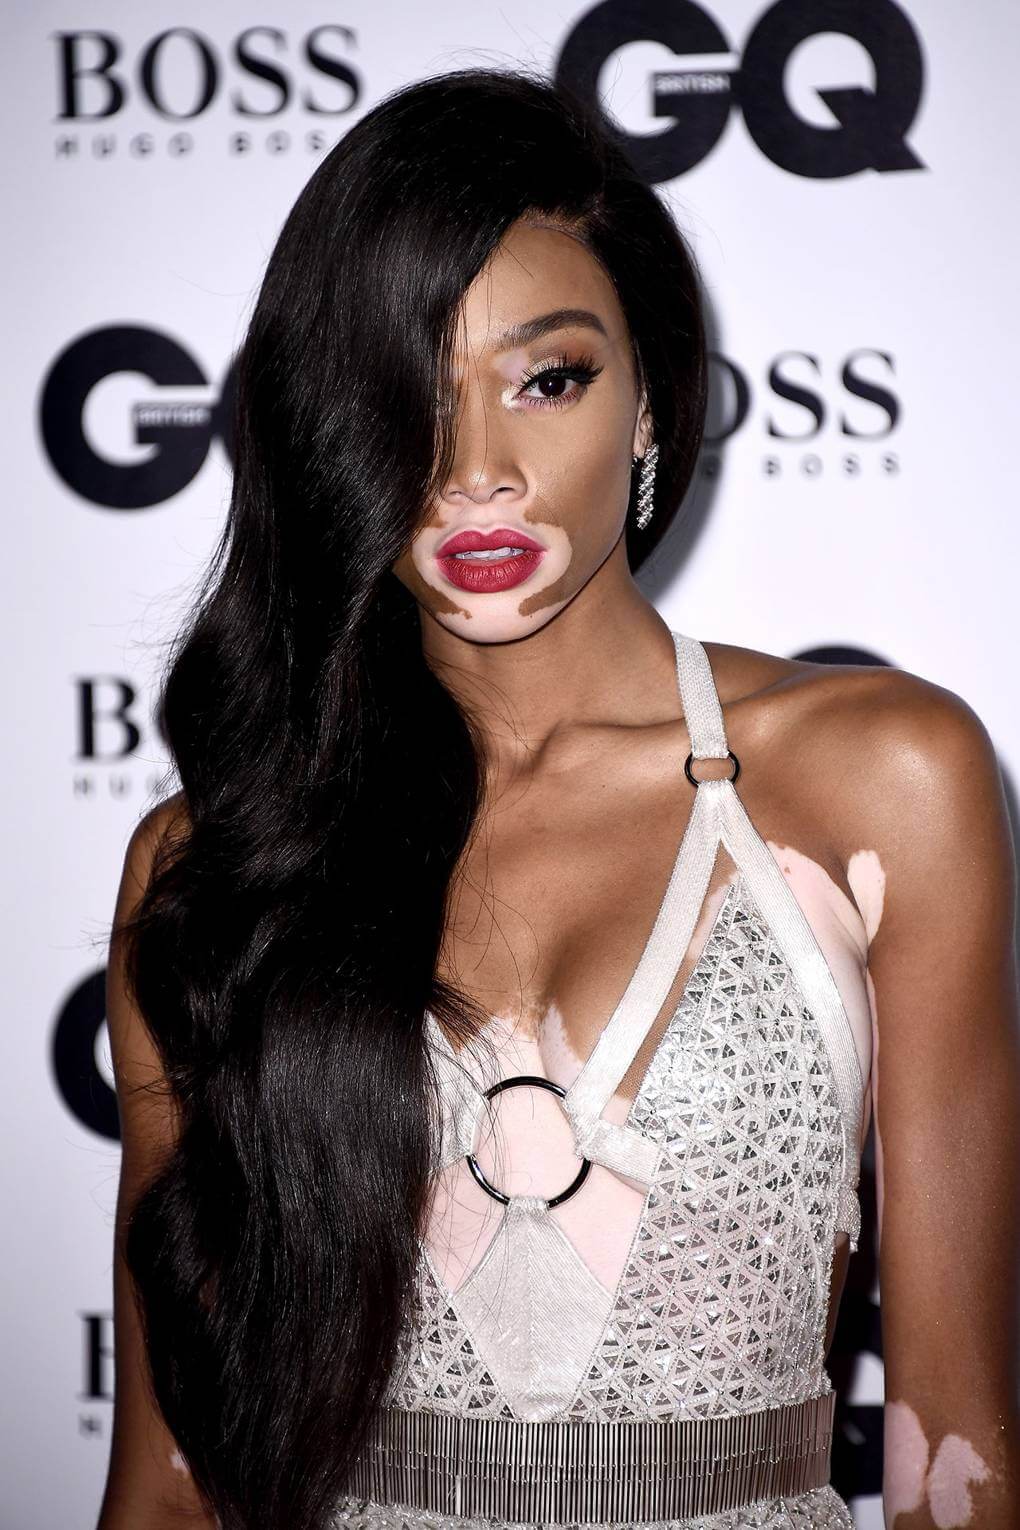 49 Hot Pictures Of Winnie Harlow Which Are Going To Make You Want Her Badly | Best Of Comic Books